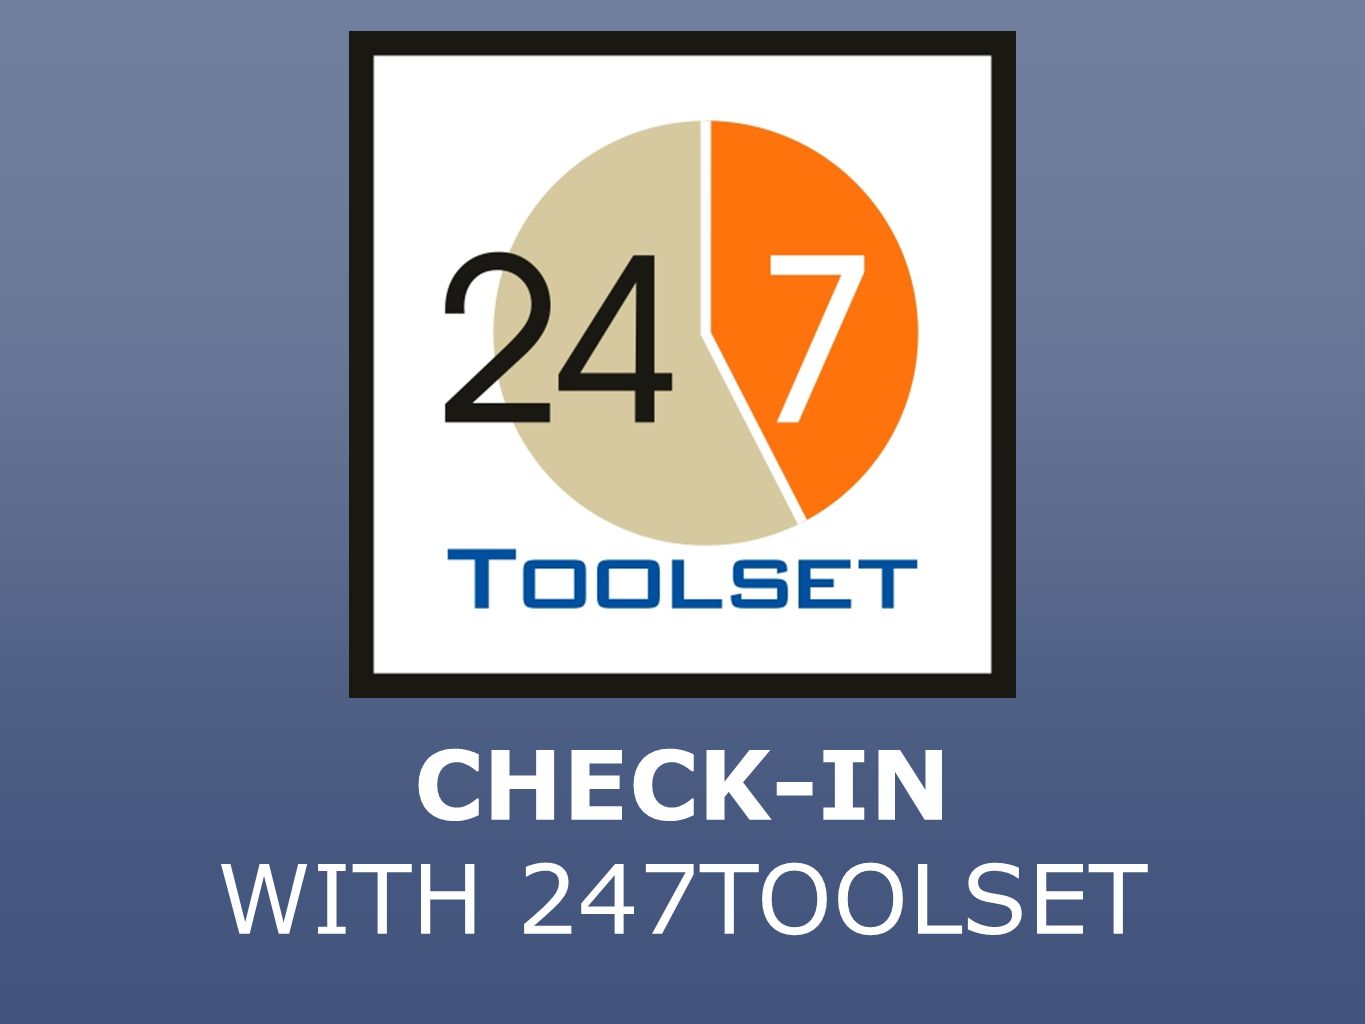 CHECK-IN WITH 247TOOLSET